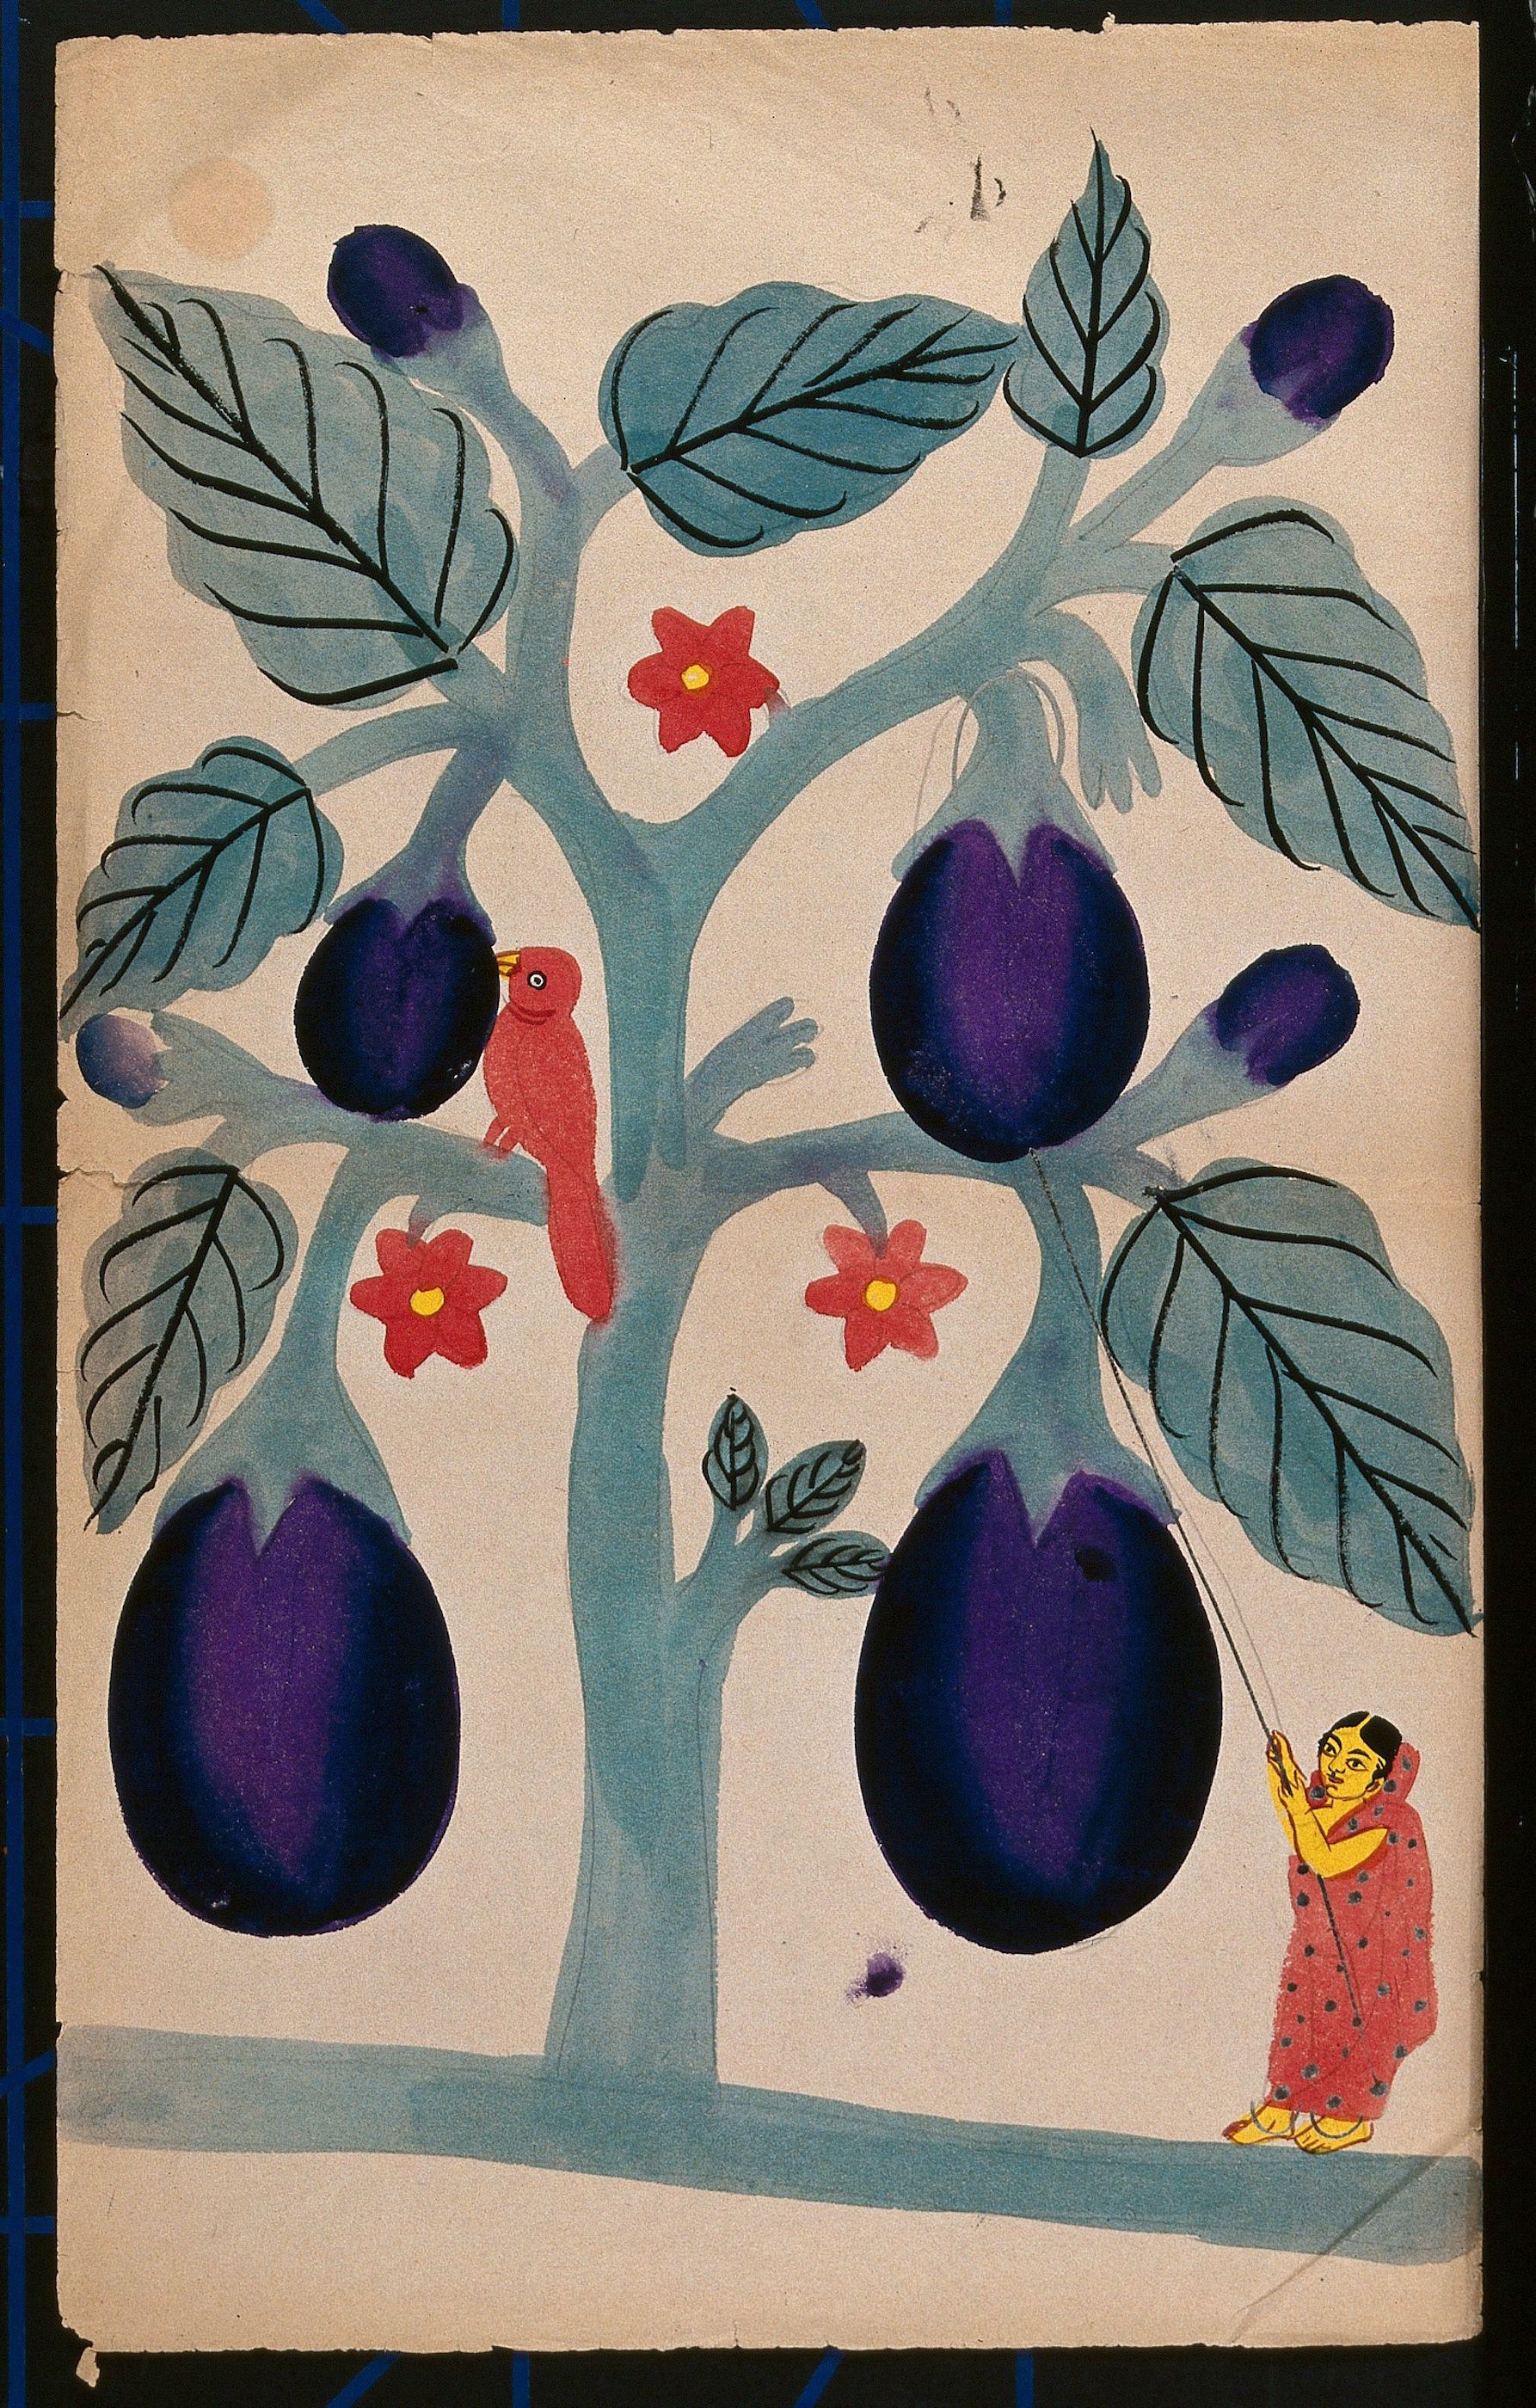 A Woman Pulling Giant Aubergines From a Tree by Unknown Artist - 19th century - 46.1 x 28.4 cm Wellcome Library